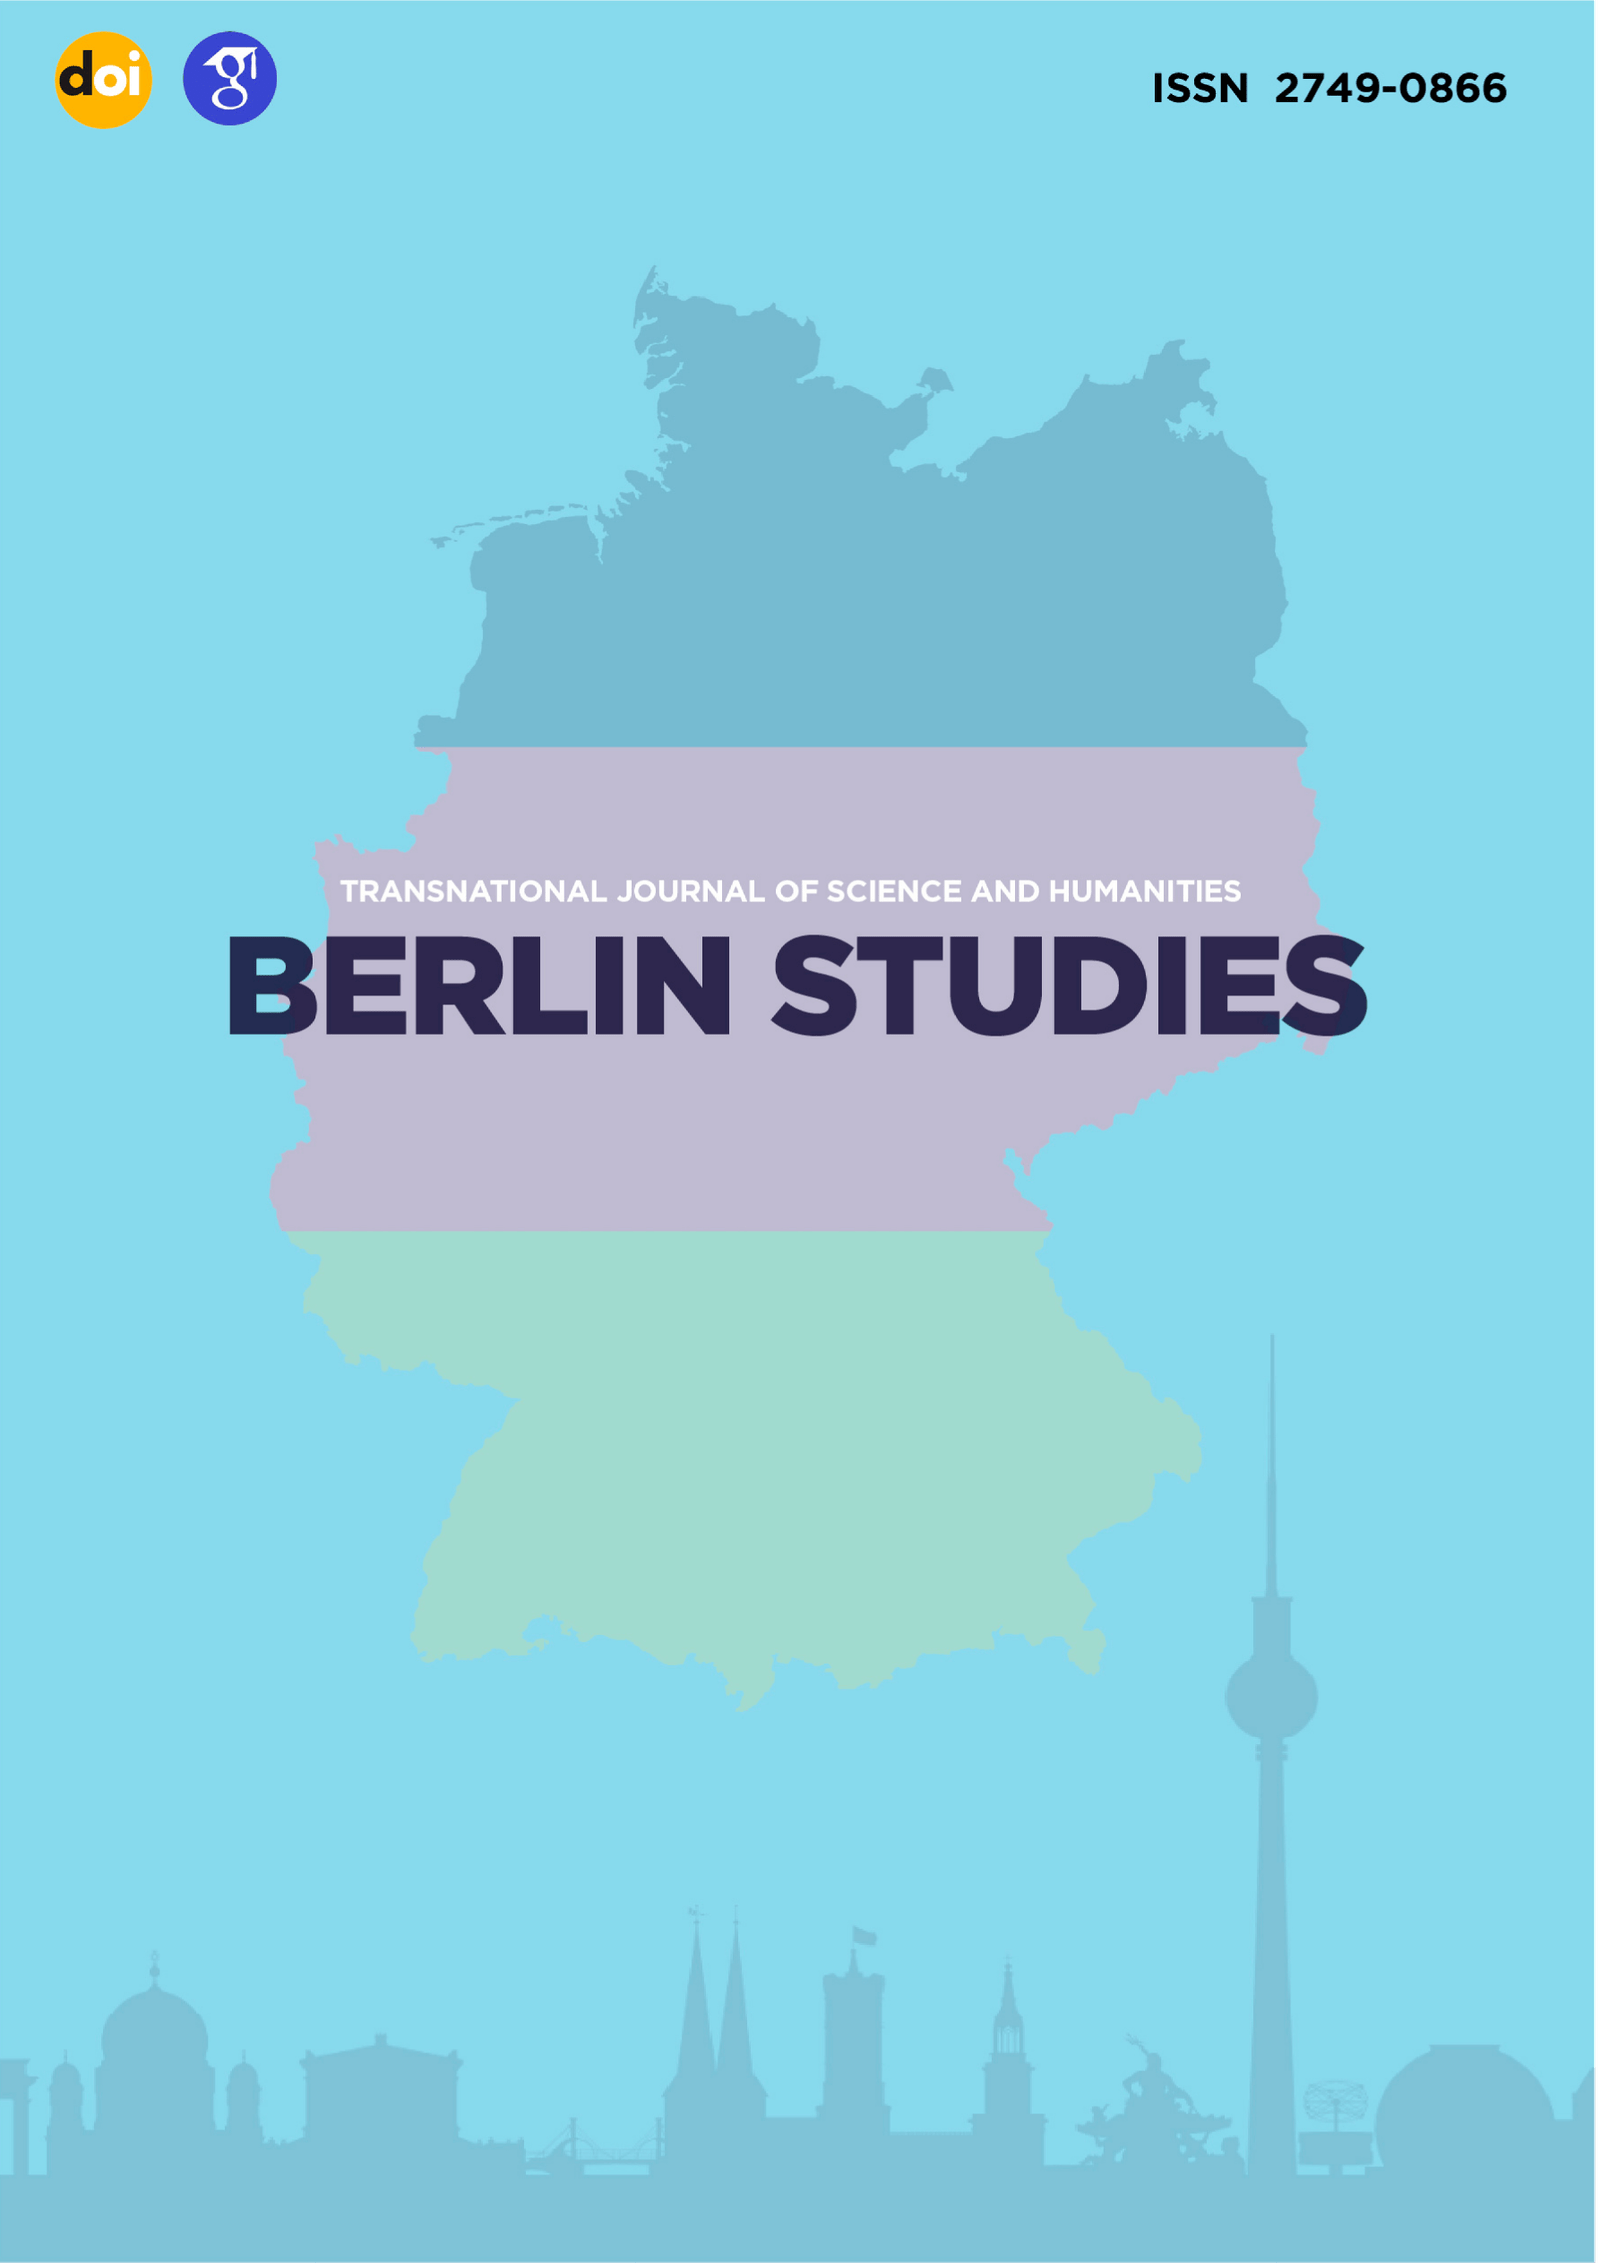 					View Vol. 1 No. 2 (2021):  Berlin Studies Transnational Journal of  Science and Humanities 
				